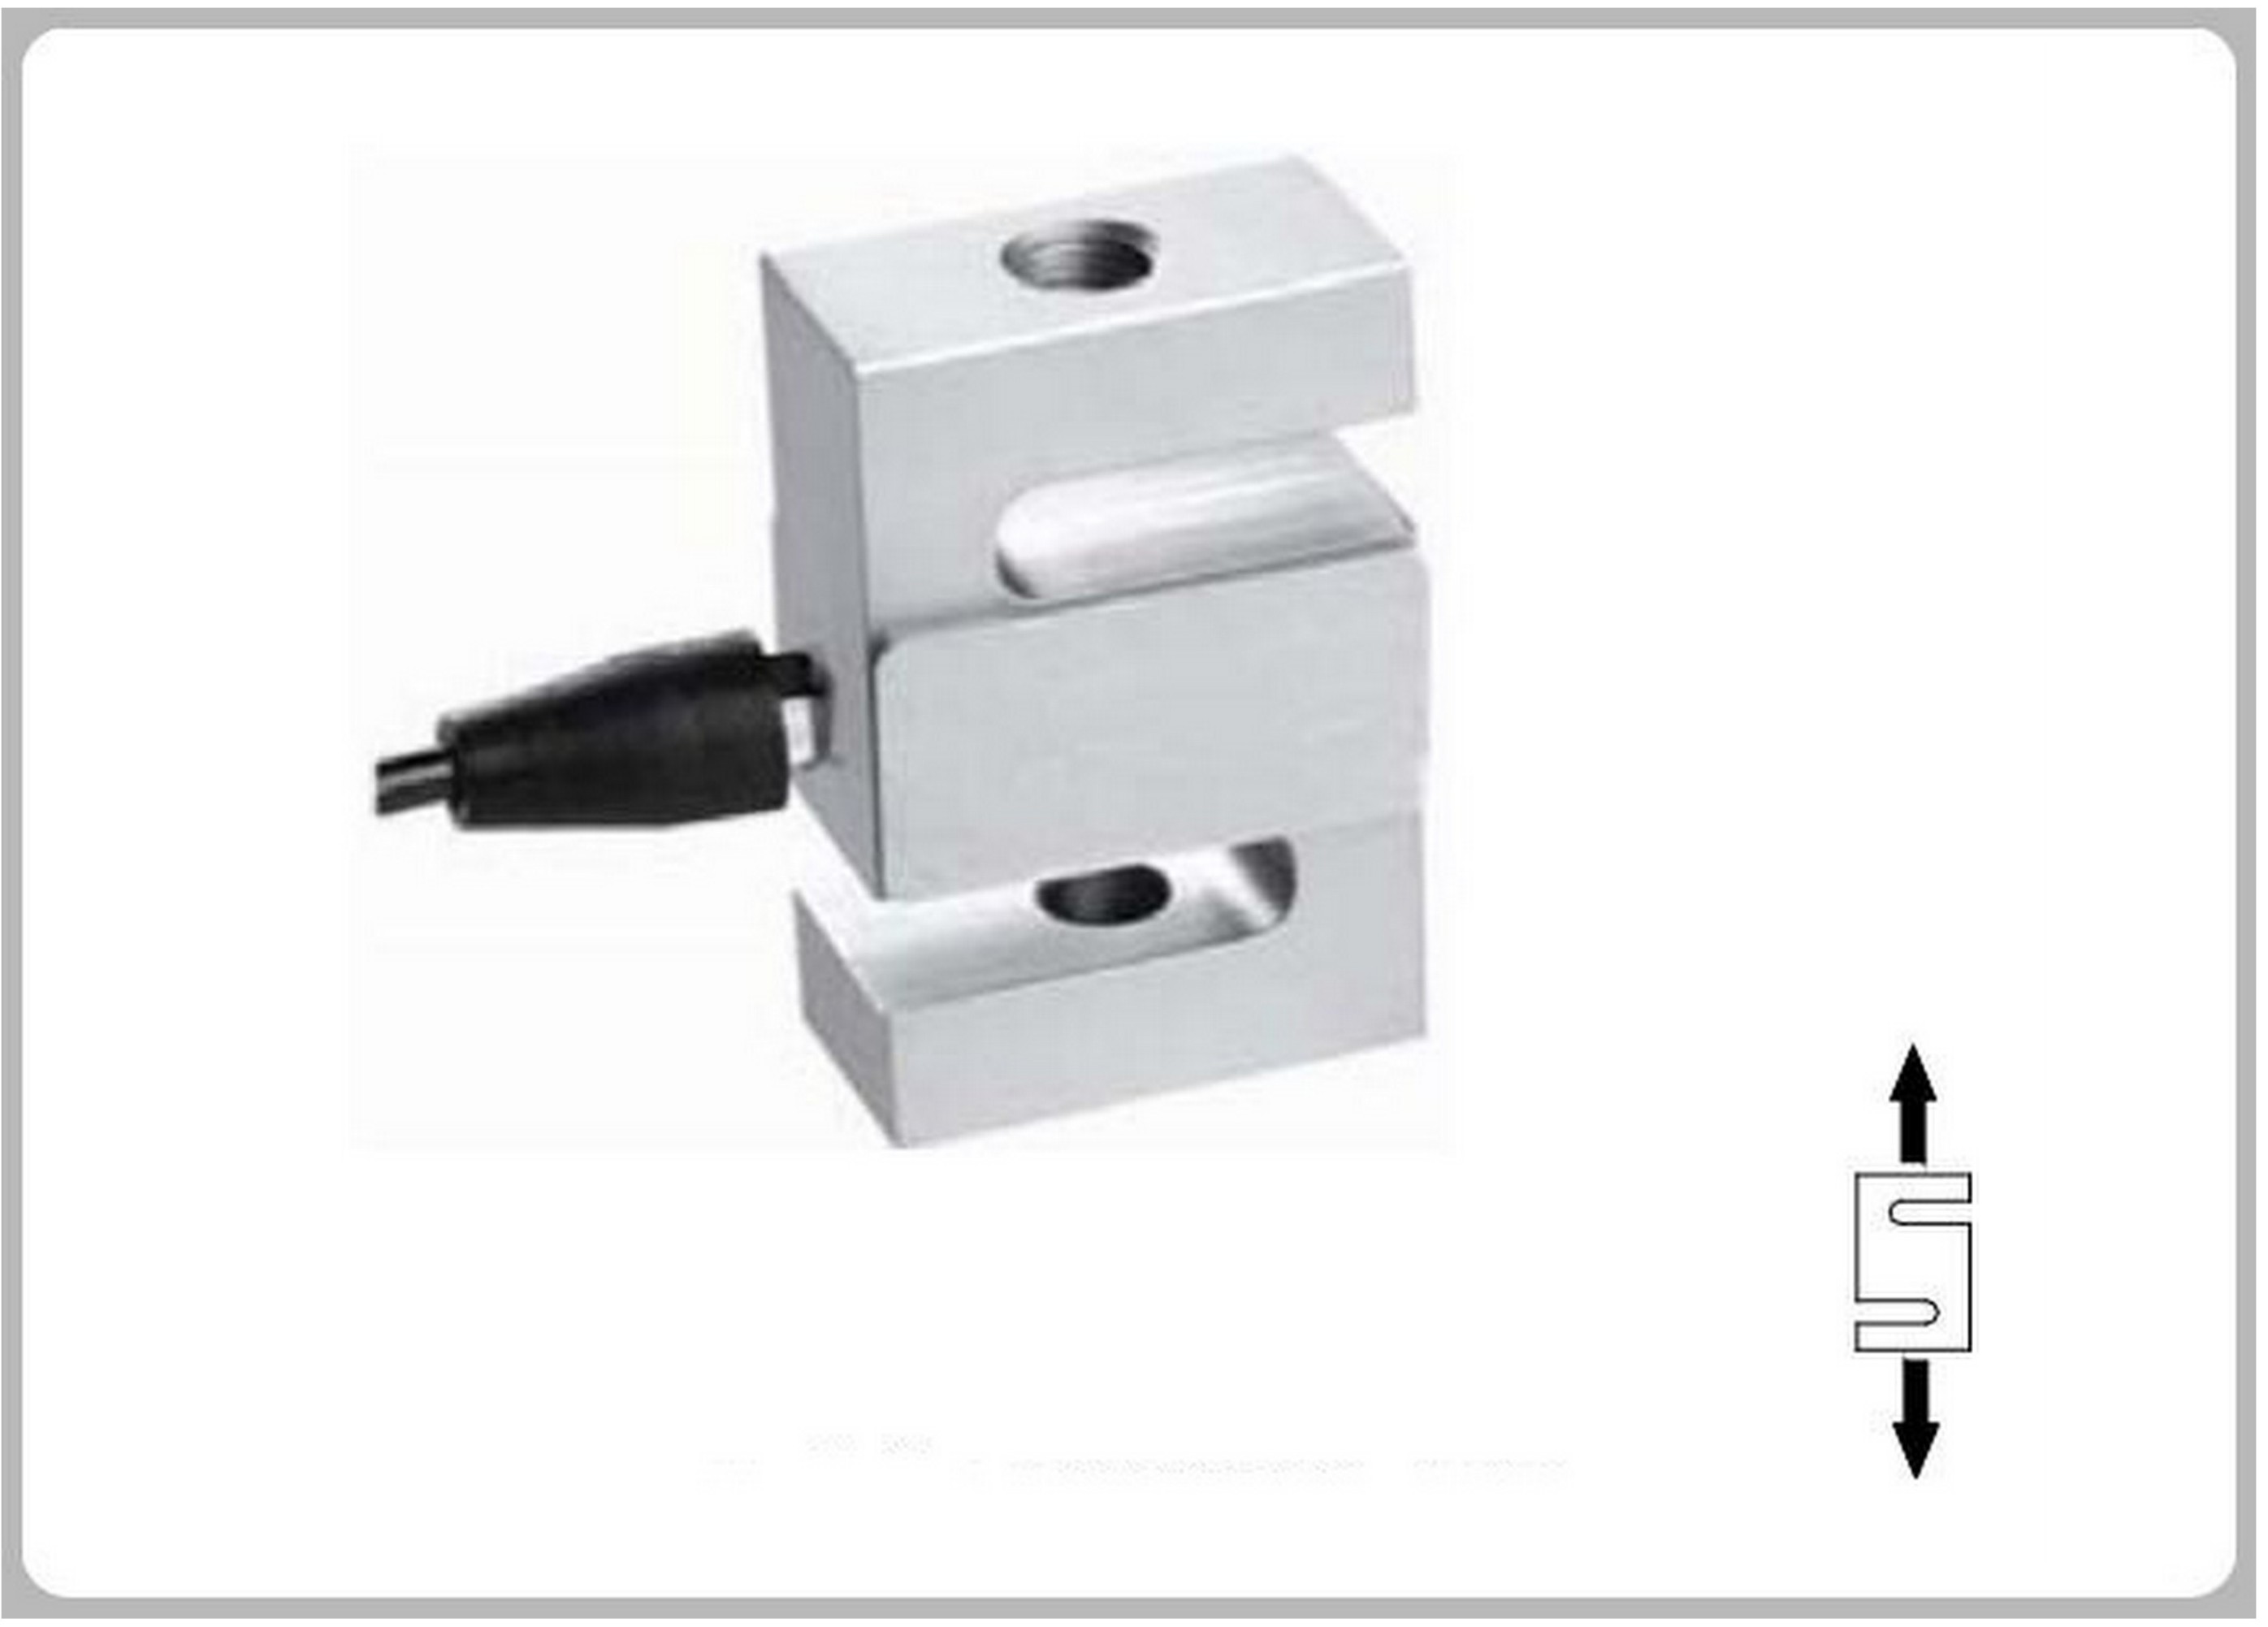 MC8117 LOAD CELL & FORCE TRANSDUCER